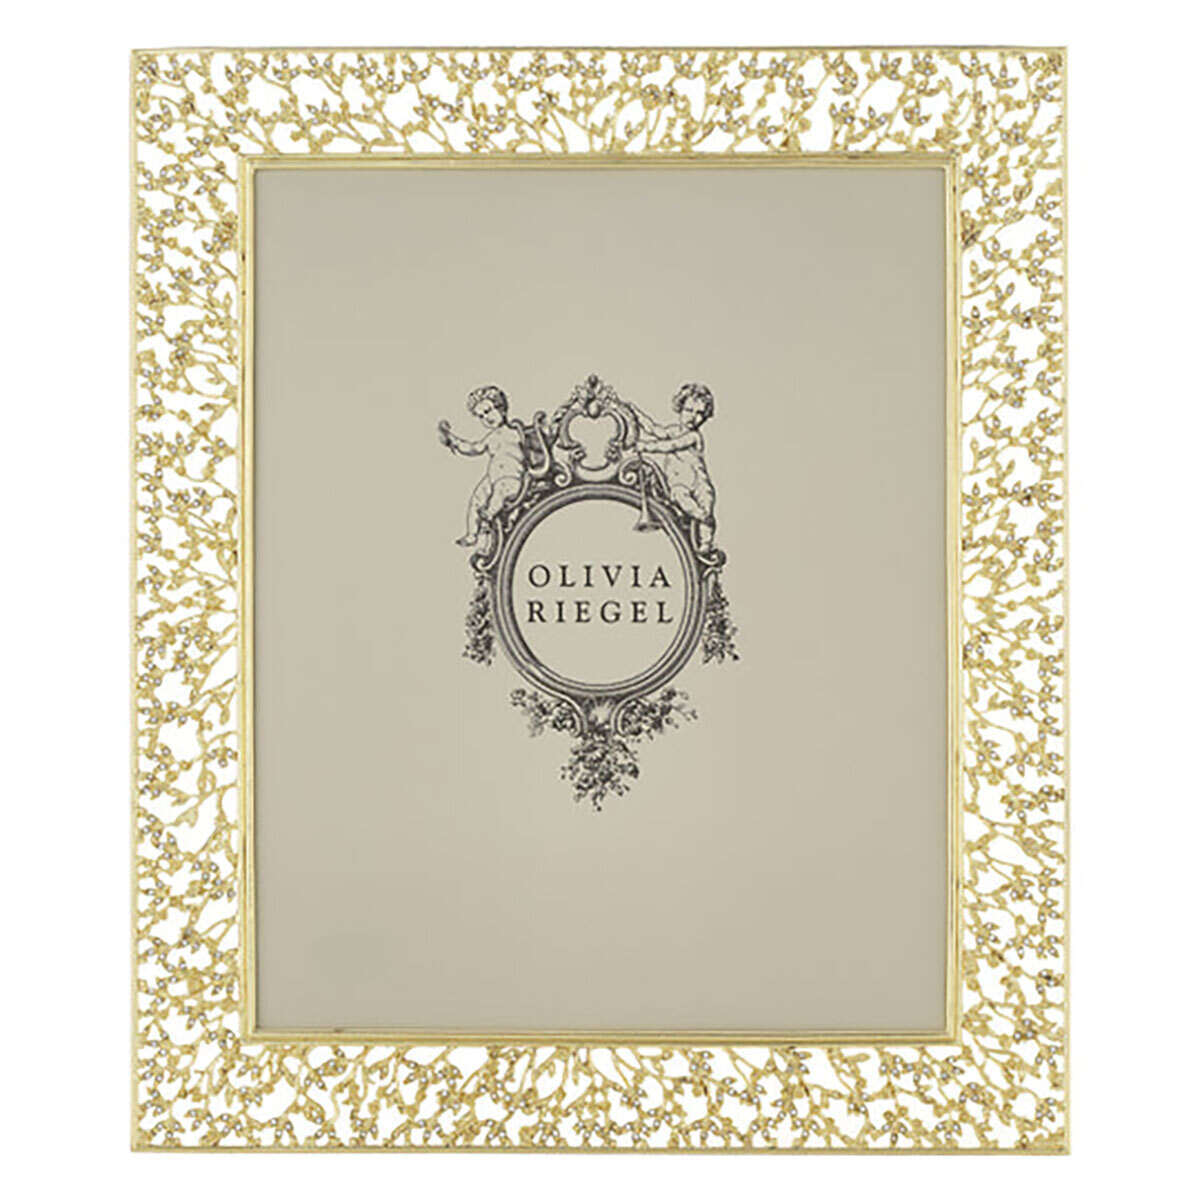 Olivia Riegel Gold Isadora 8" x 10" Picture Frame RT2363